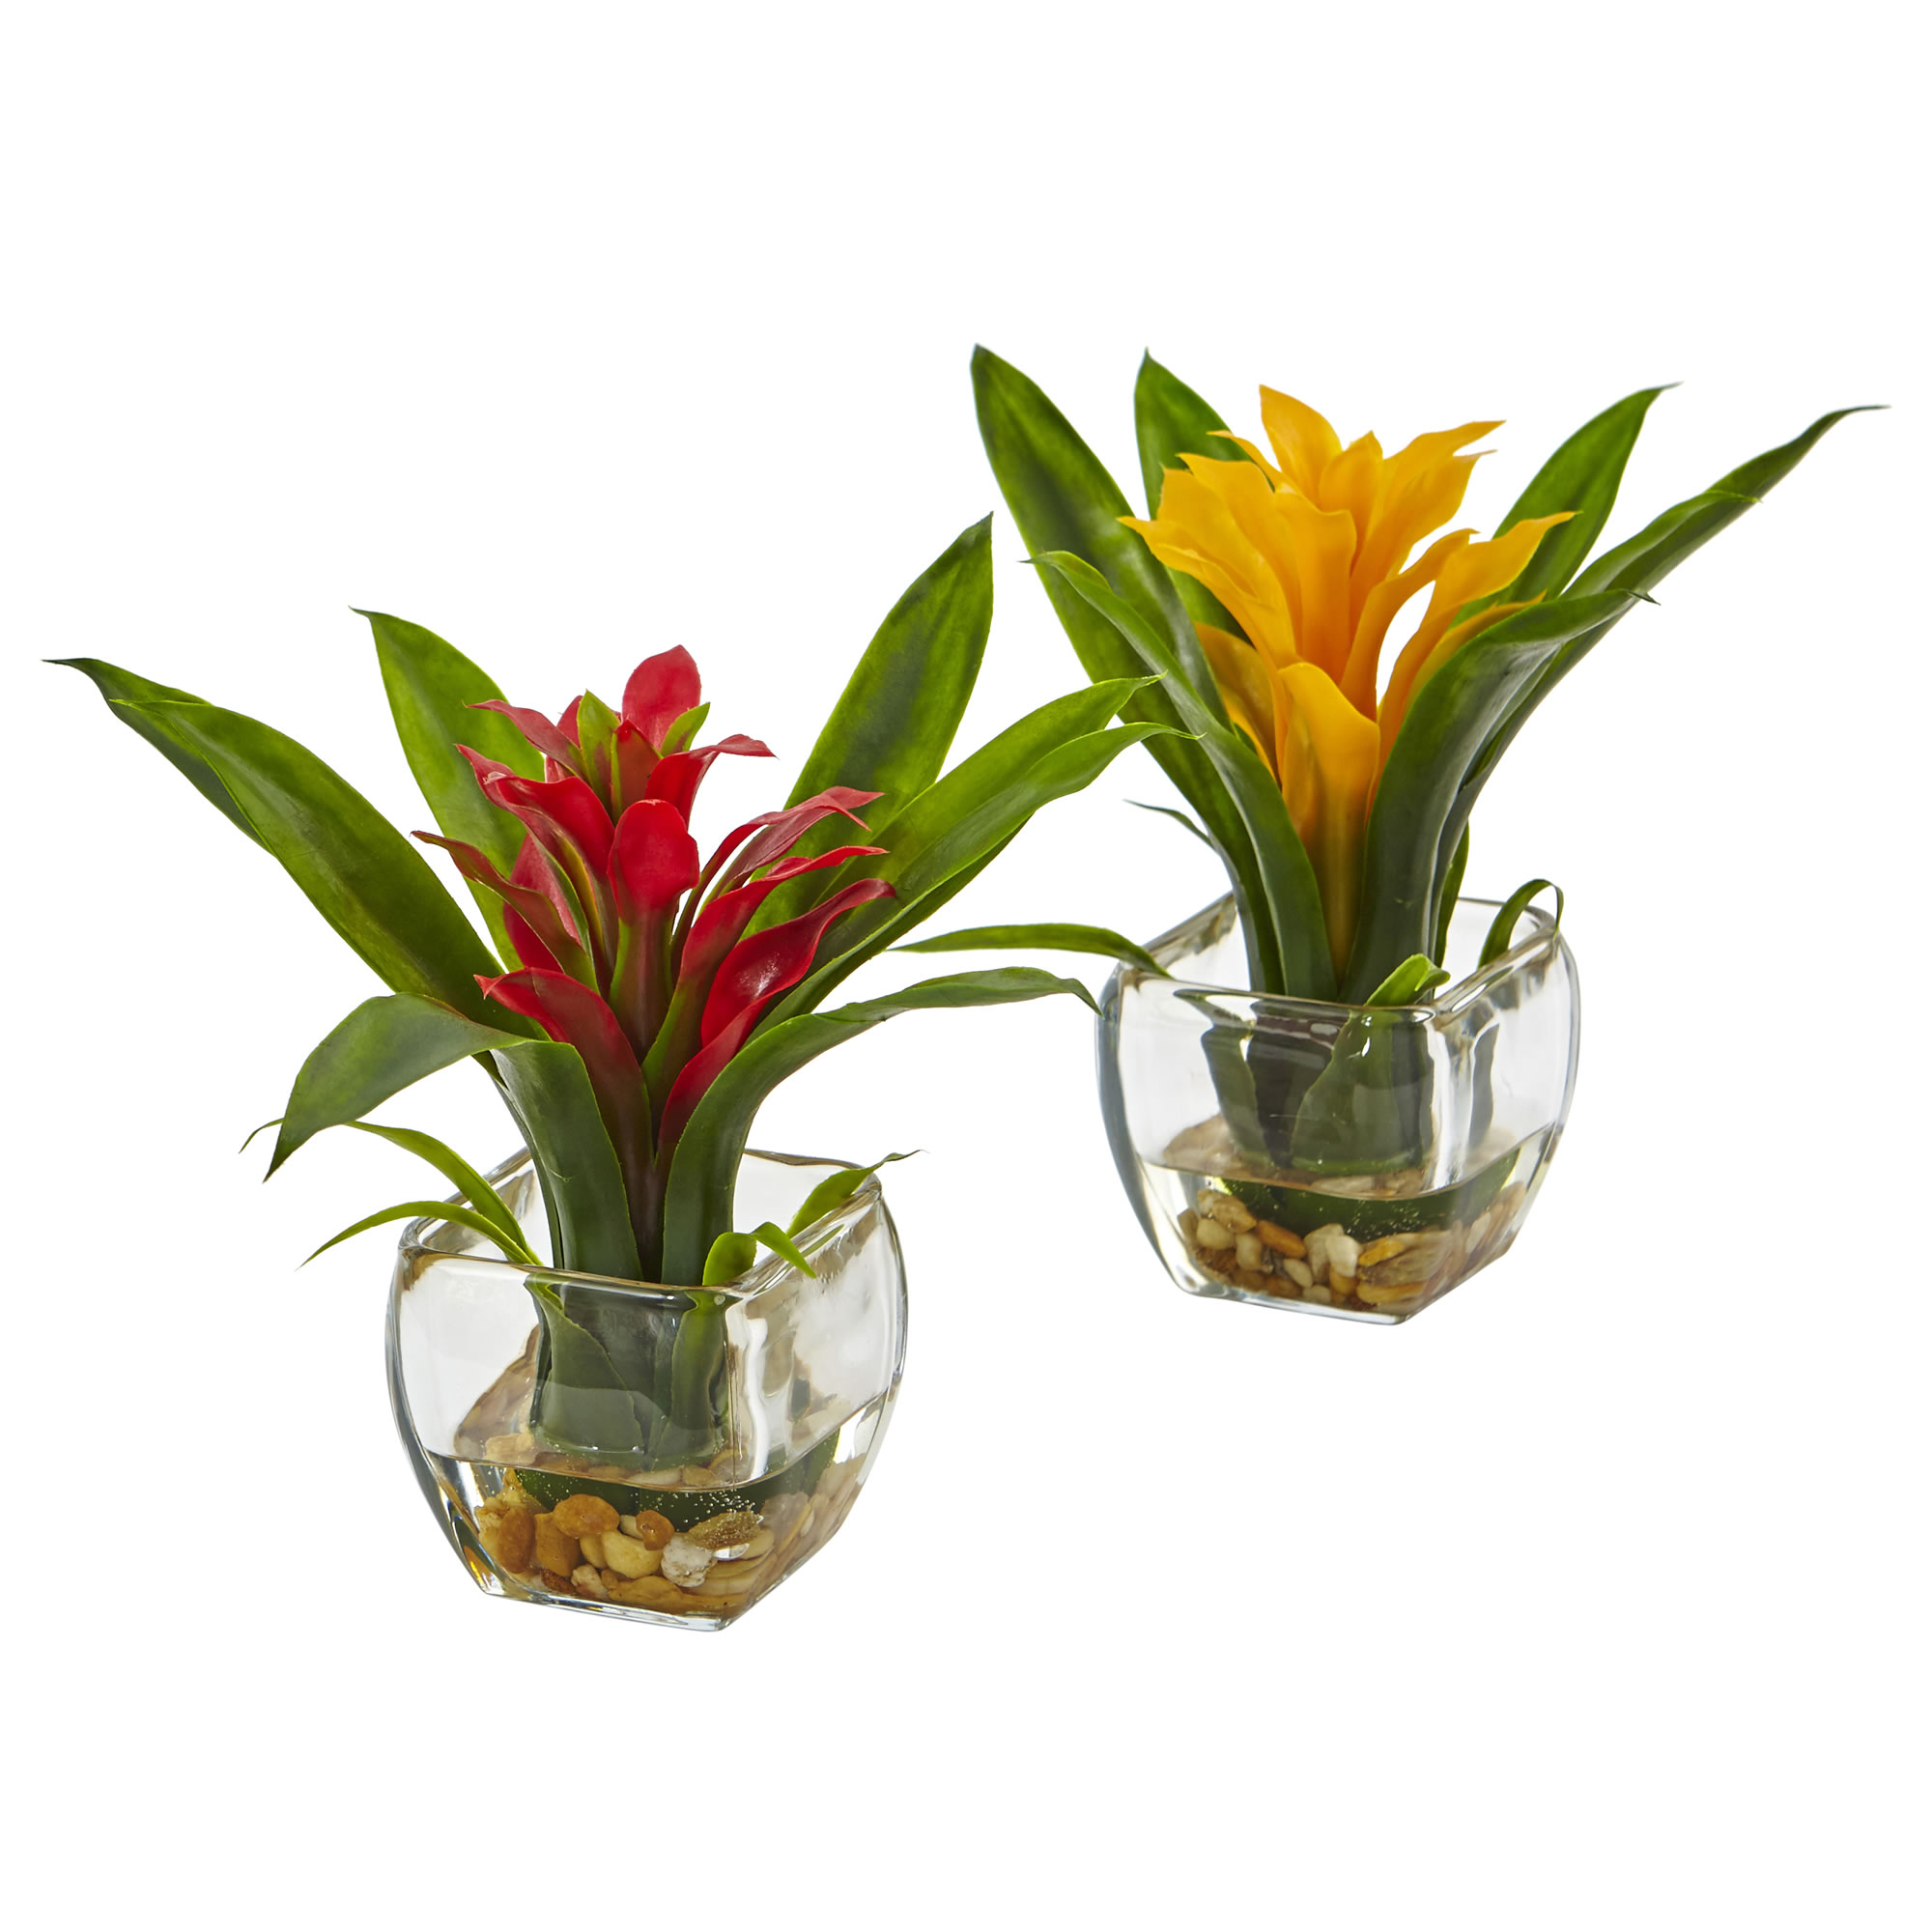 8 Inch Red, Yellow Bromeliad With Vase Arrangement (set Of 2)